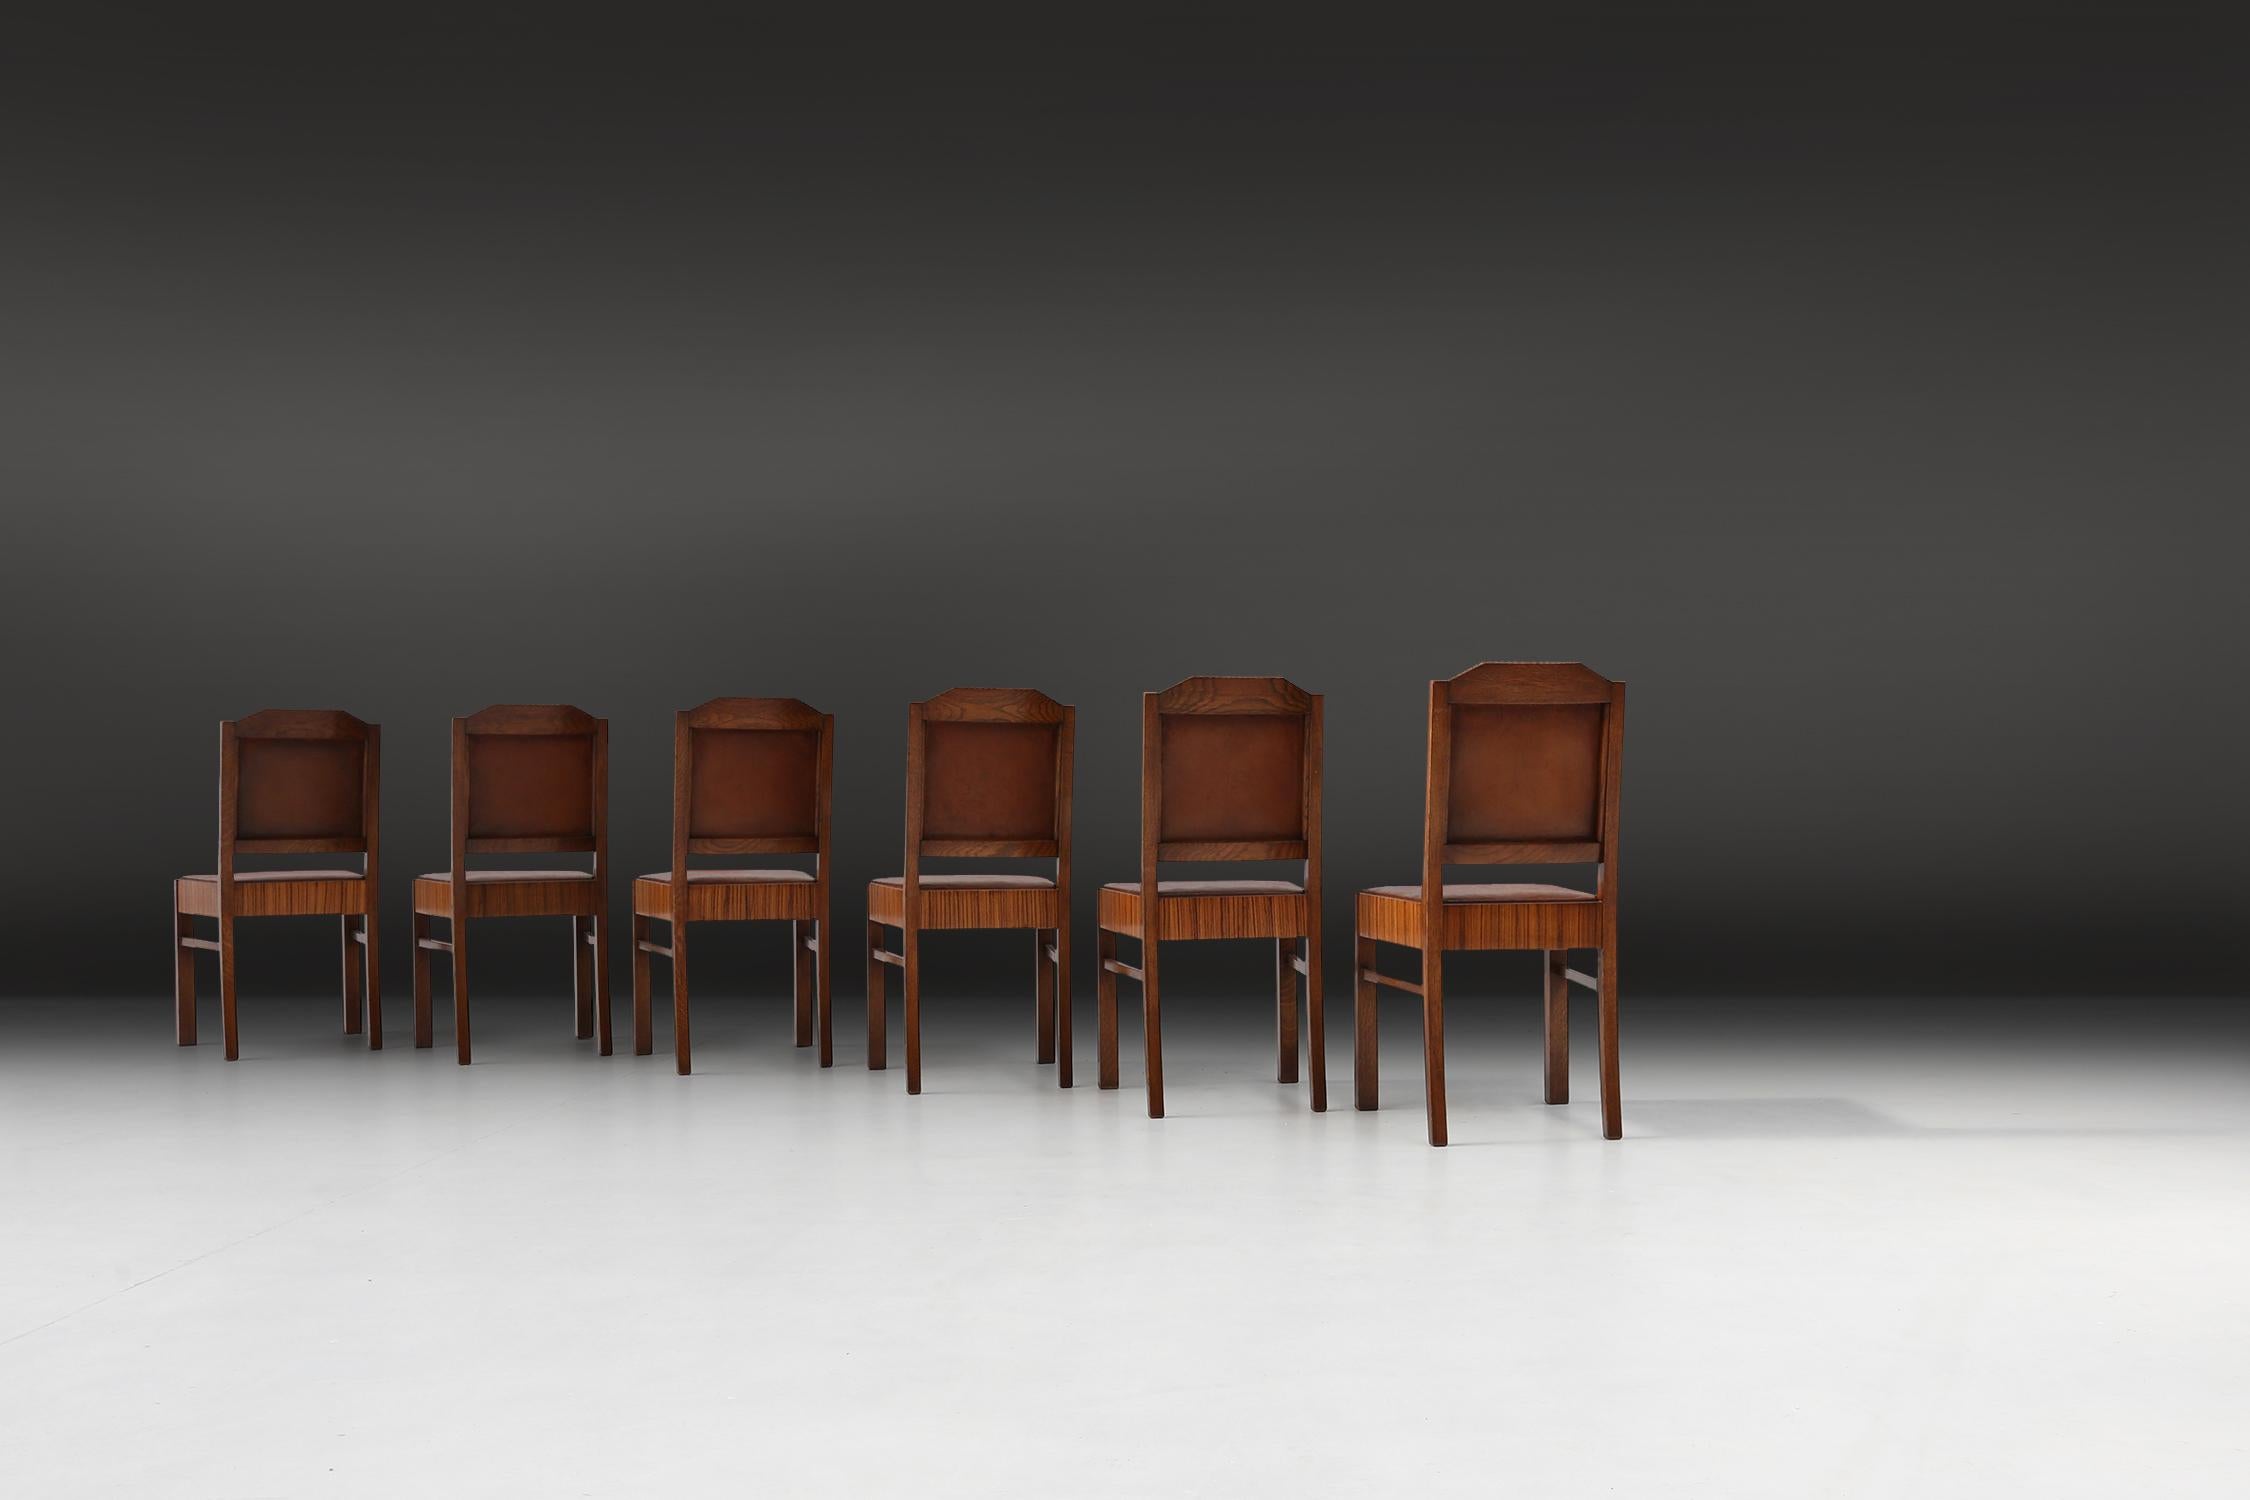 These stunning Art Deco chairs from the renowned De Coene brand are a true work of art. Made with attention to detail and craftsmanship, these chairs exude elegance and style.

The seats and backs are made of brown leather, which is soft and